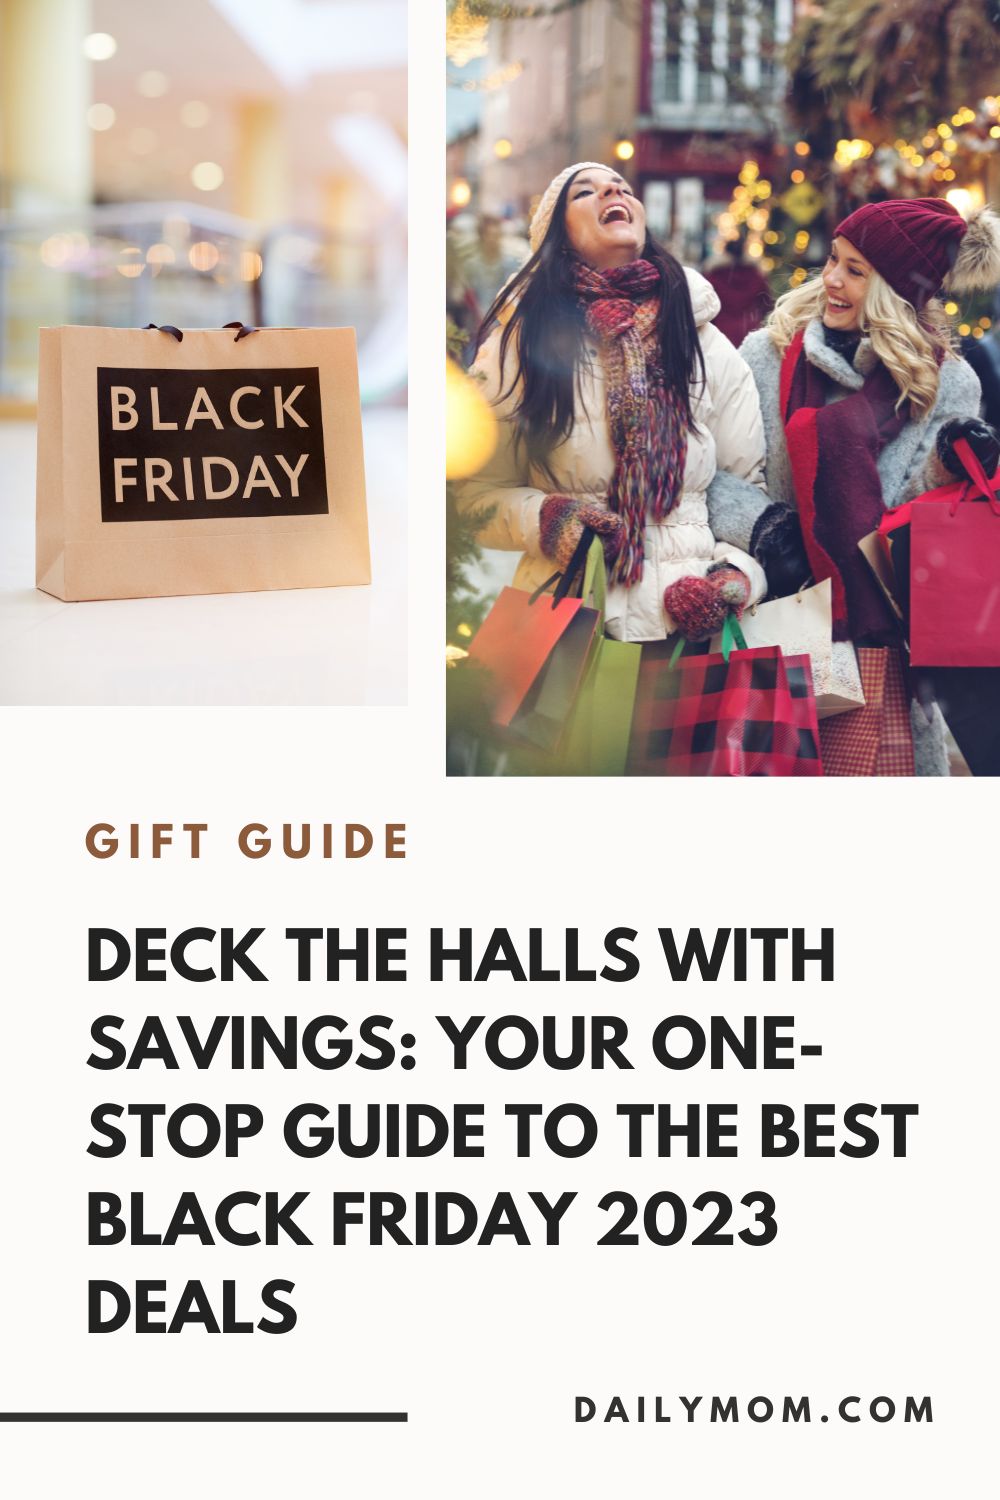 Deck The Halls With Savings: Your One-Stop Guide To The Best Black Friday 2023 Deals   54 Daily Mom, Magazine For Families